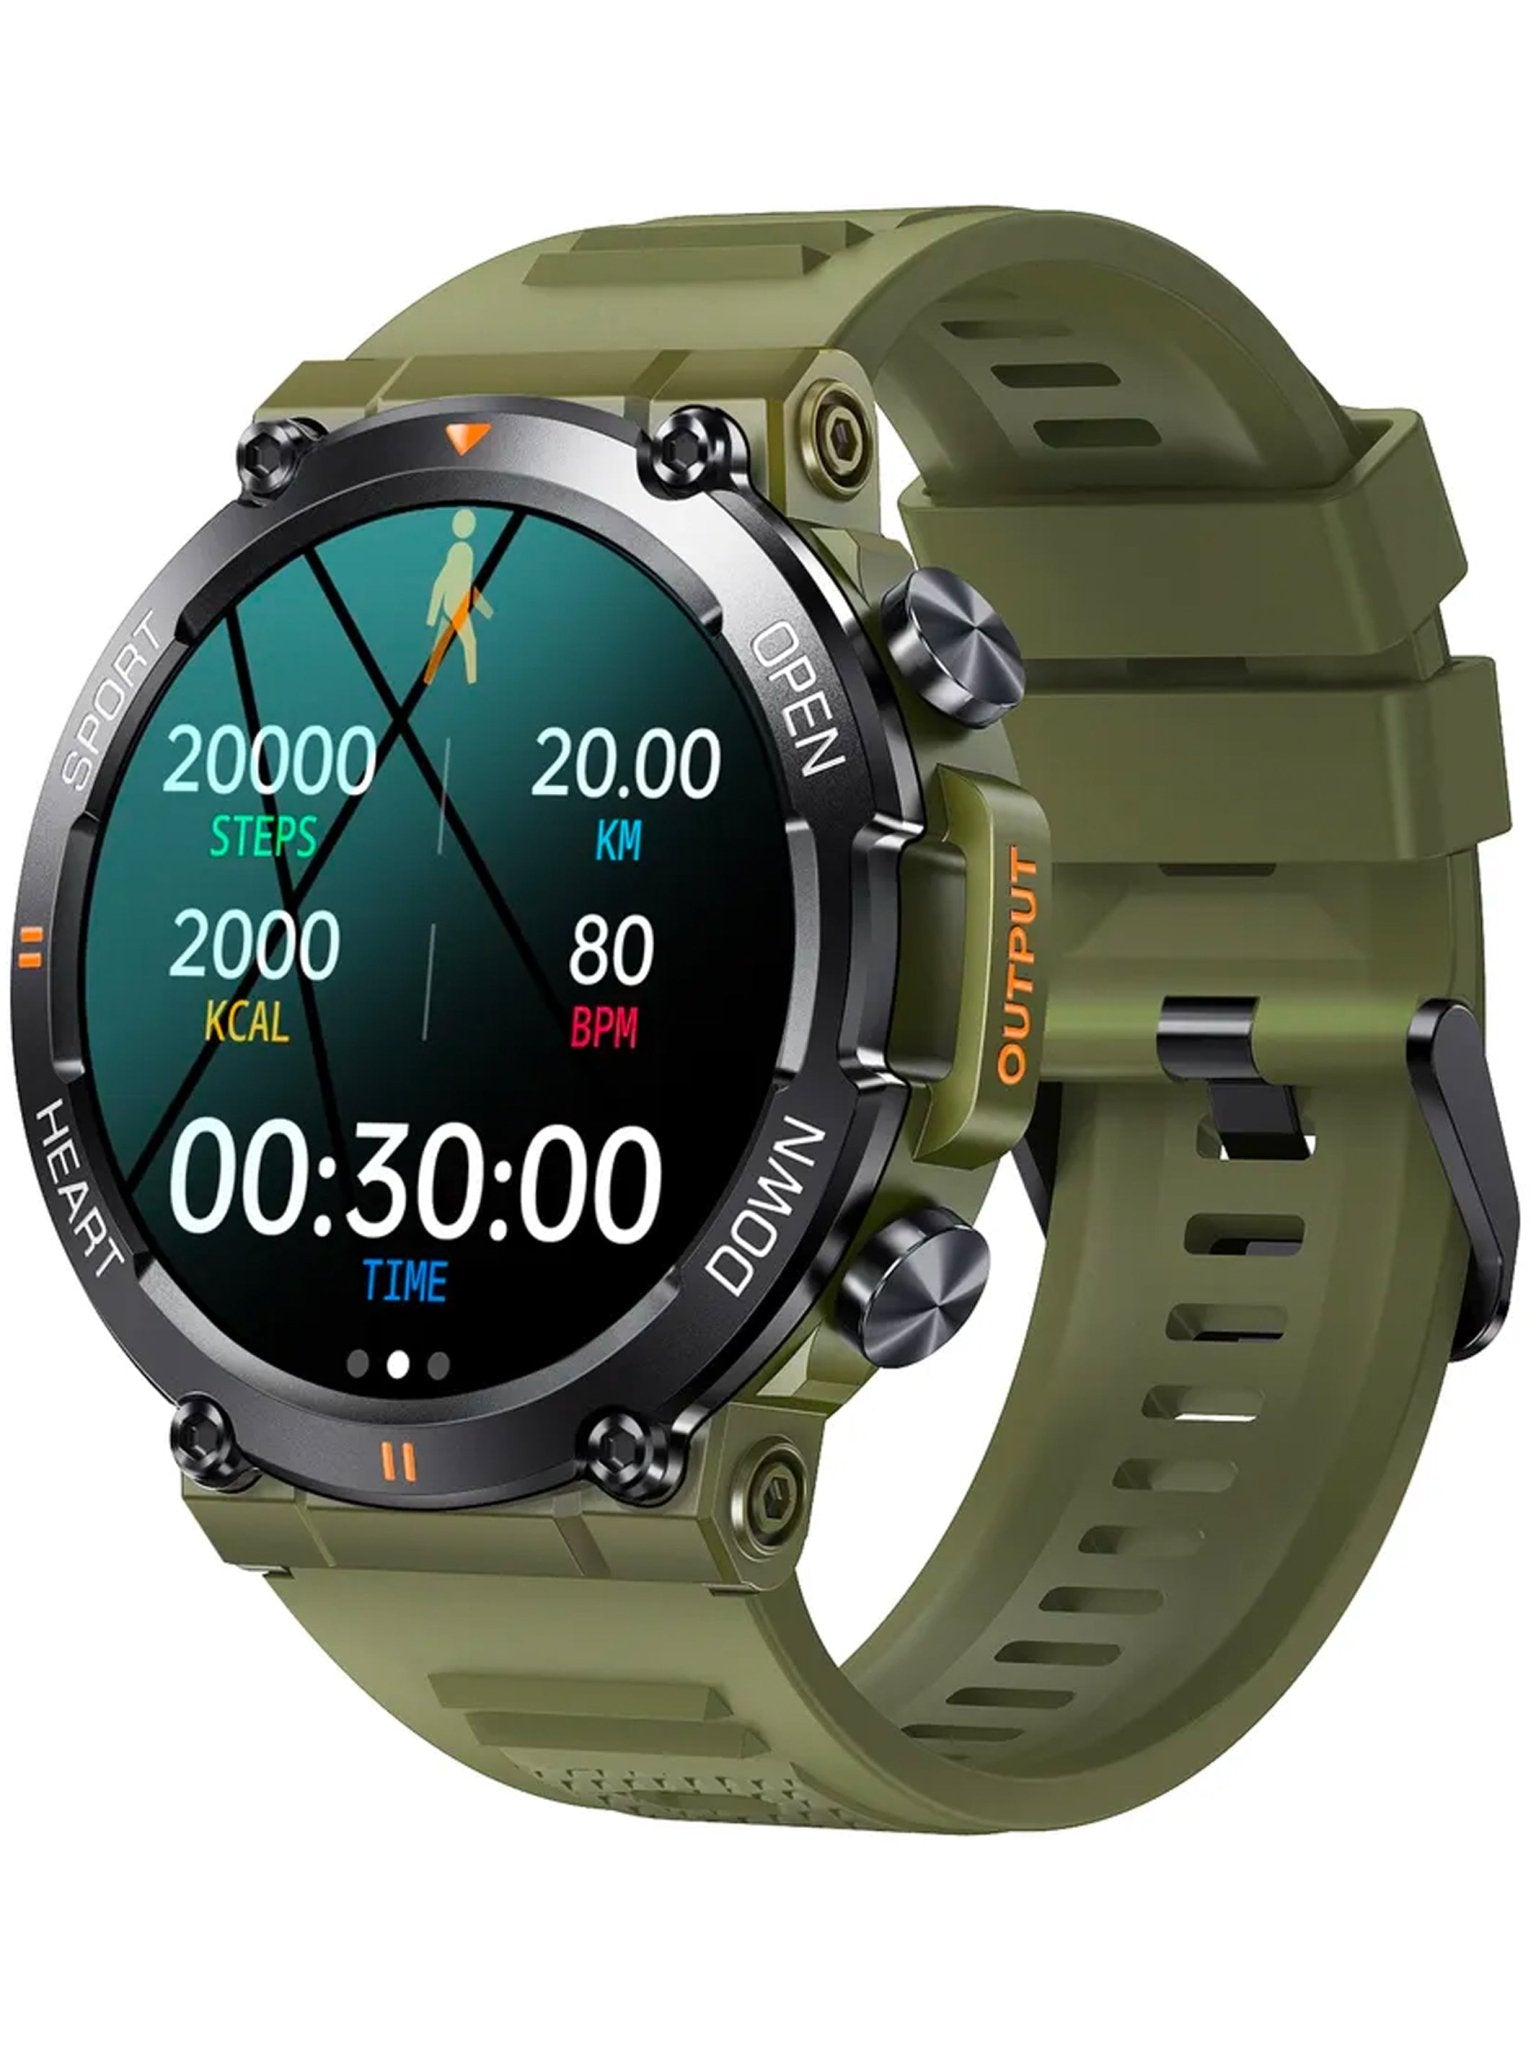 4elementsclothingTelsaTELSA UK - Smart Watch Waterproof IP67 military style mens Sports & fitness digital Watch with Touch Screen display, Fitness Watch, Heart Rate, Step counter Smart Watch for men IOS & AndroidWatch5060976970306